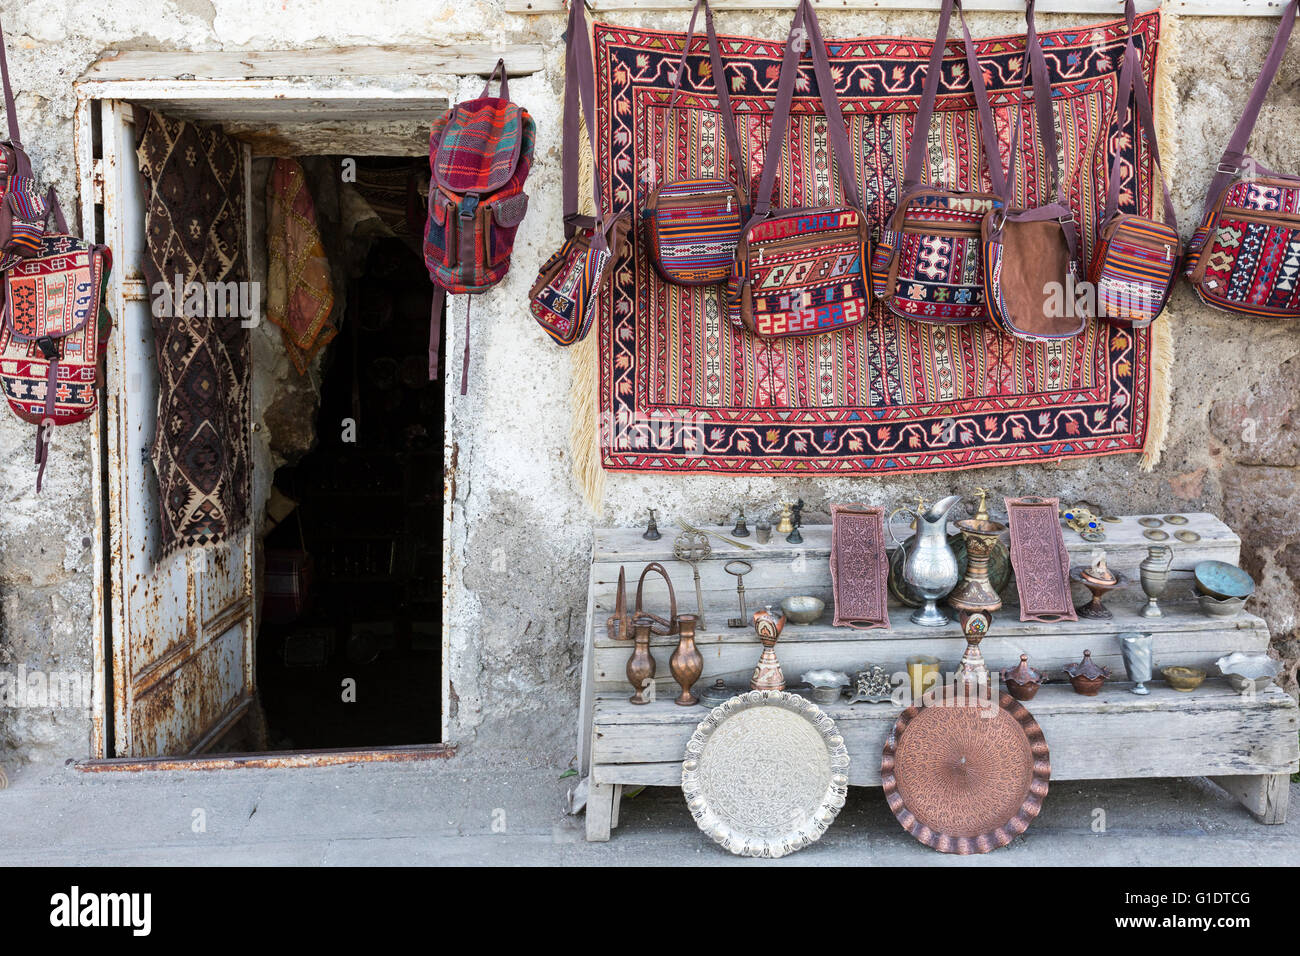 Carpets and antiques in Cappadocia, Turkey. Stock Photo